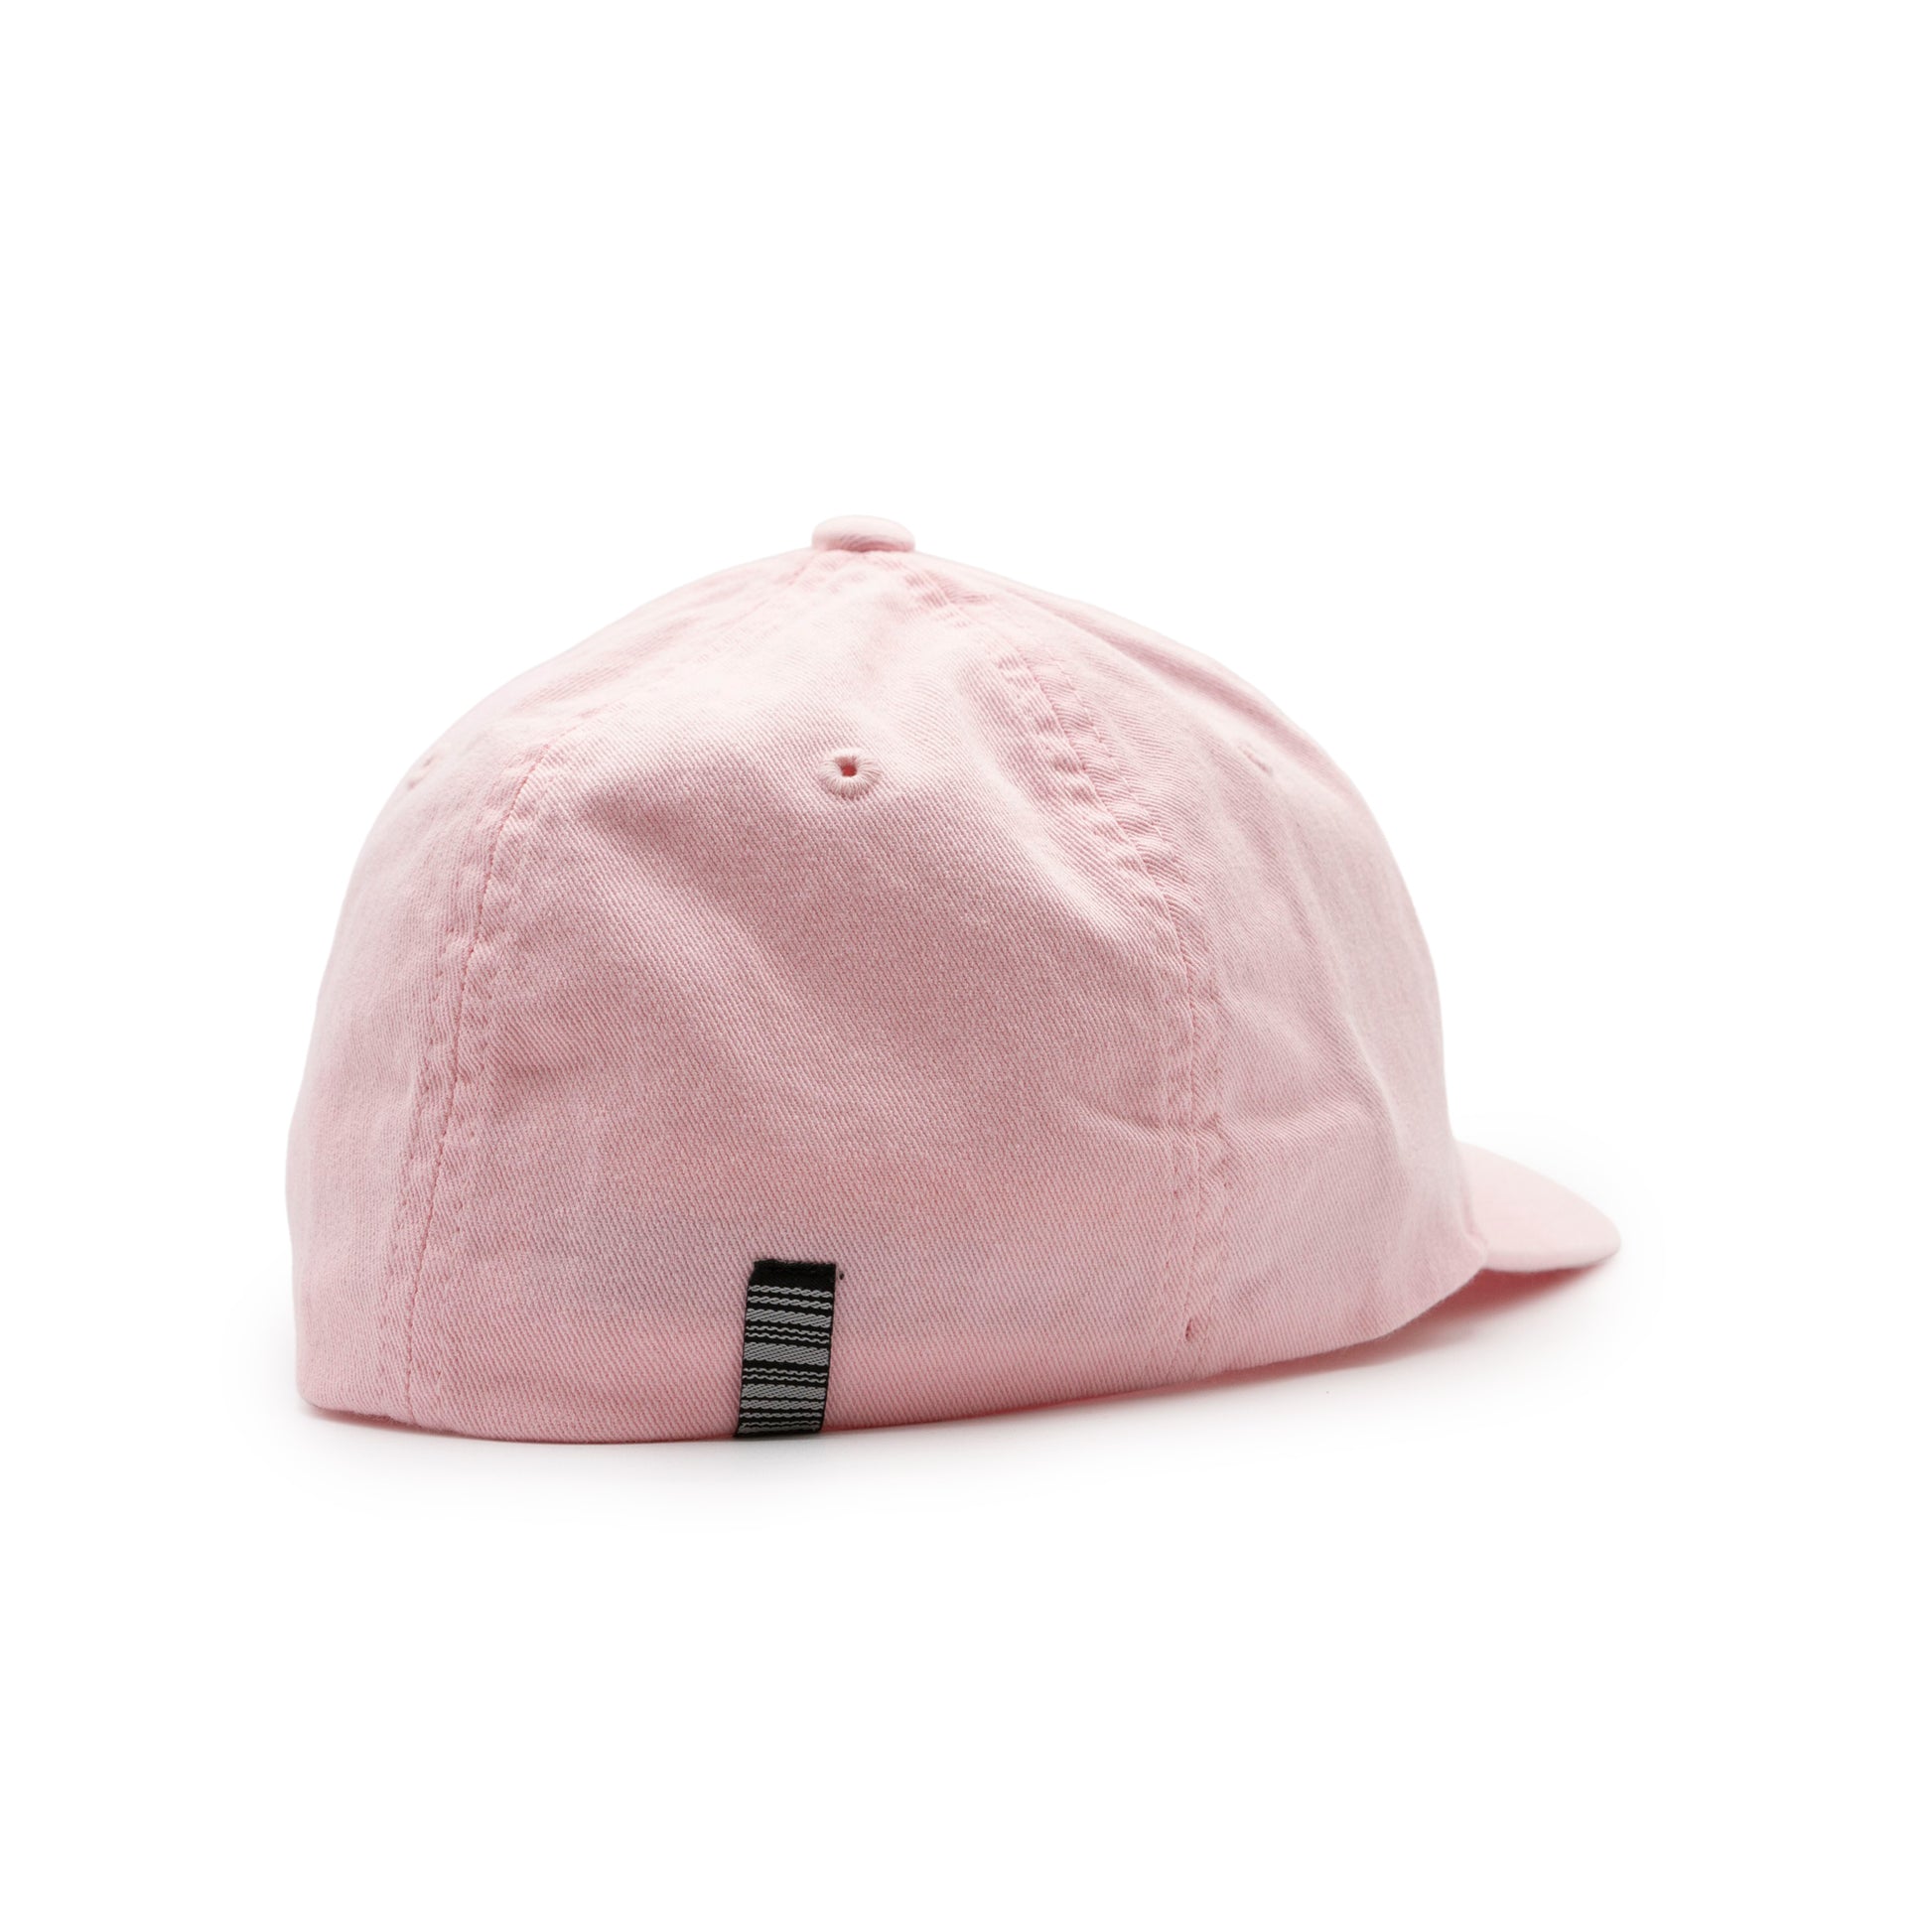 SS20 - Pink Yupong Cap with Love SS20 patch – weareSS20